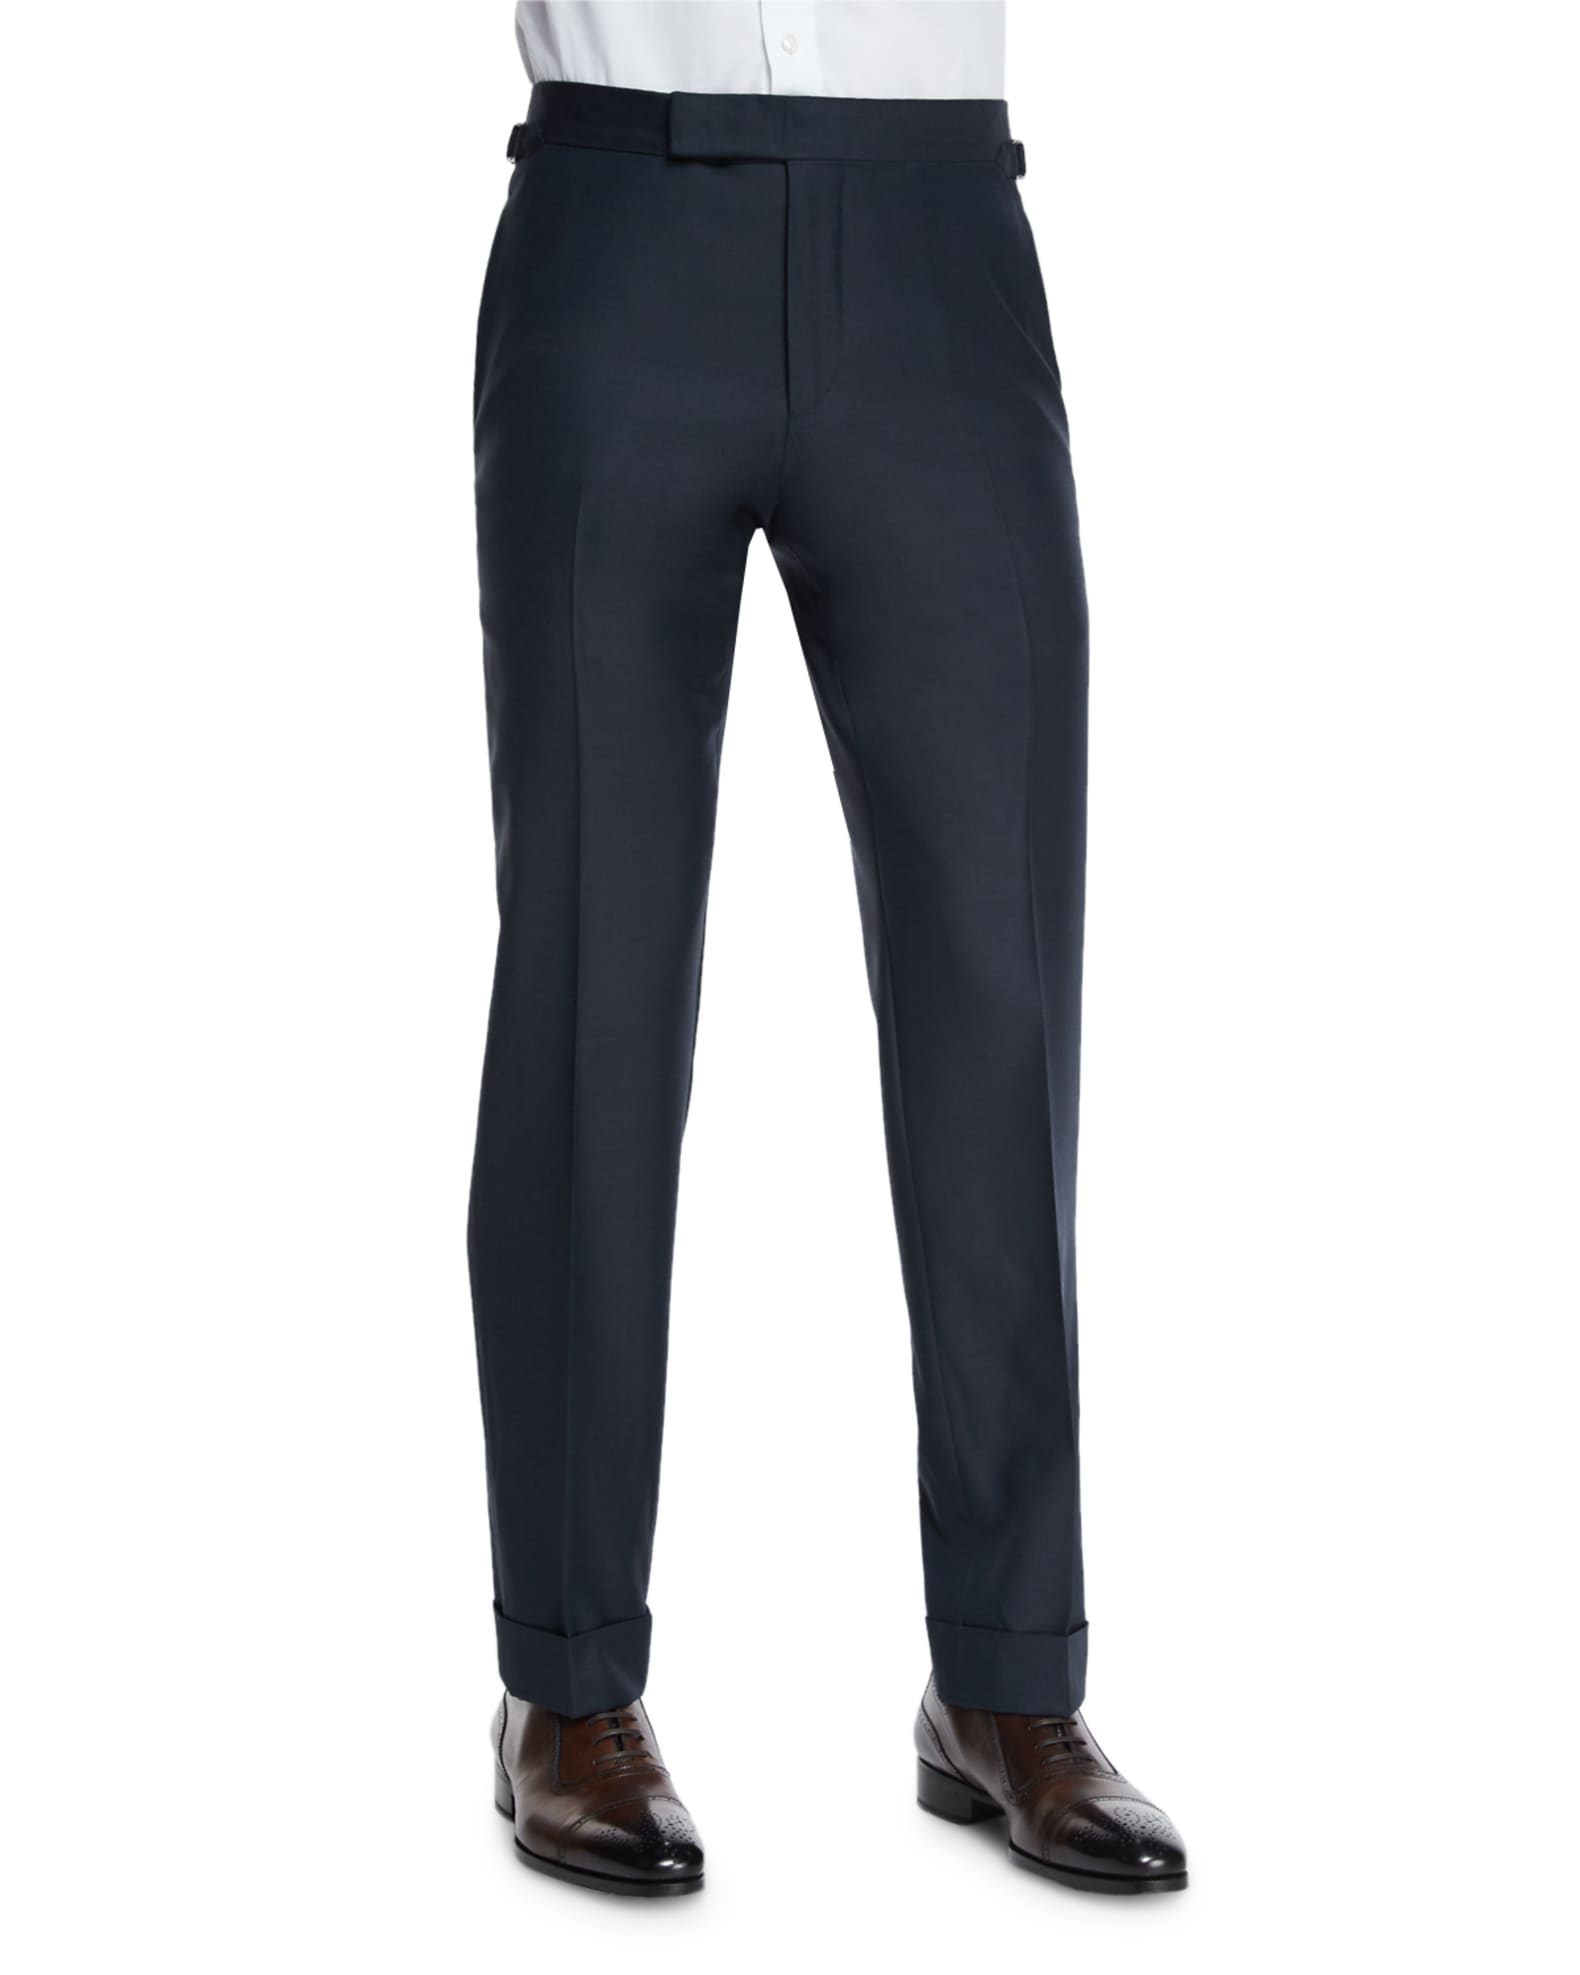 TOM FORD O'Connor Base Flat-Front Sharkskin Trousers, Navy | Neiman Marcus